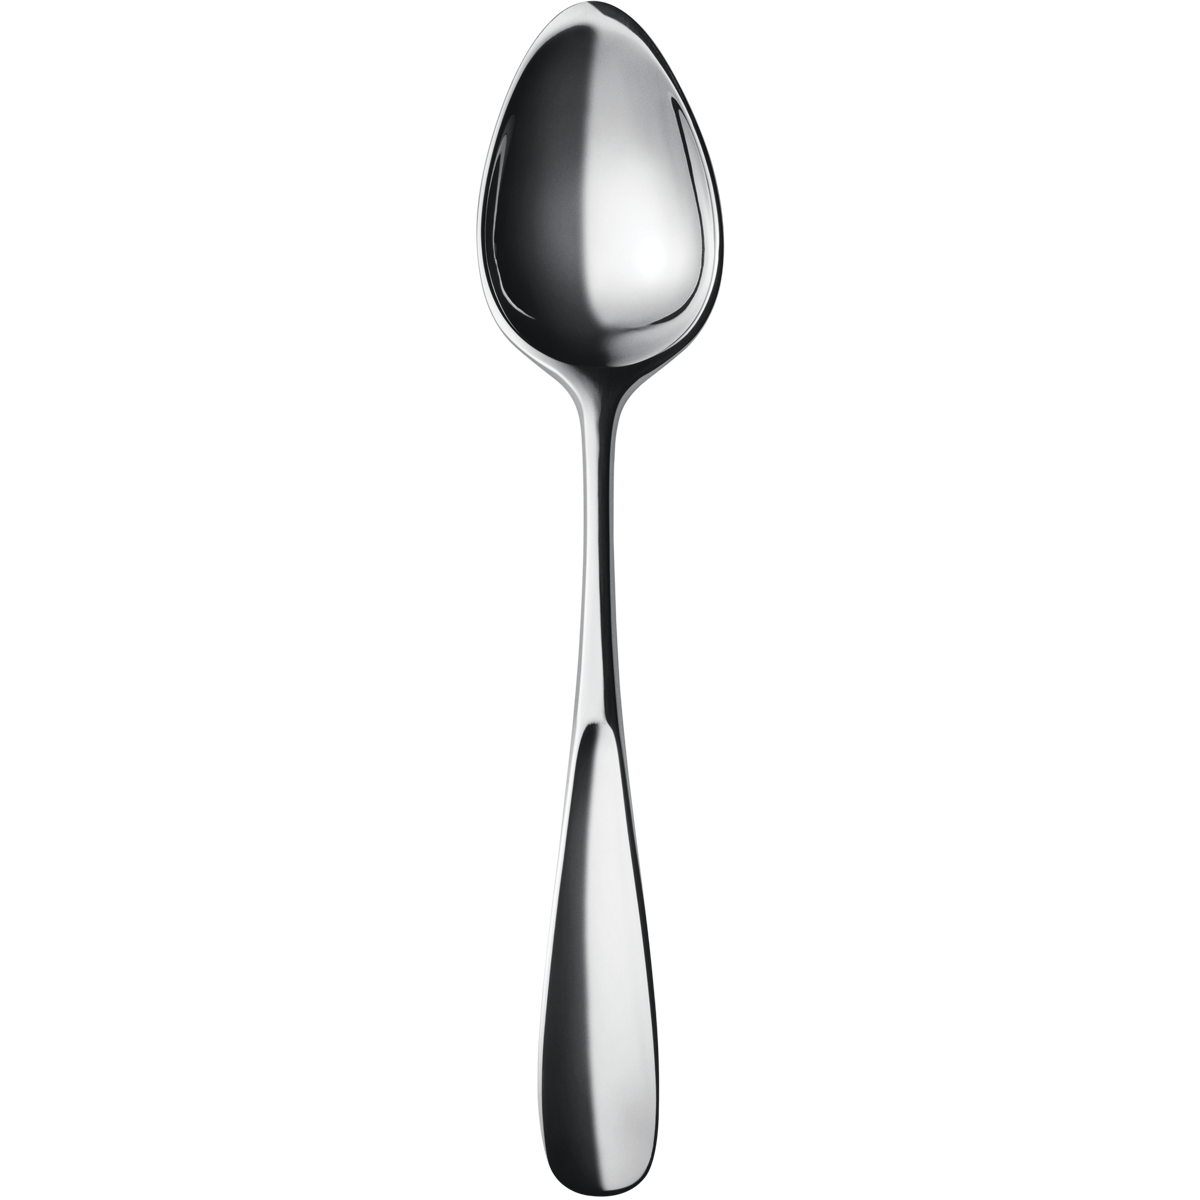 HQ Spoon Wallpapers | File 235.92Kb